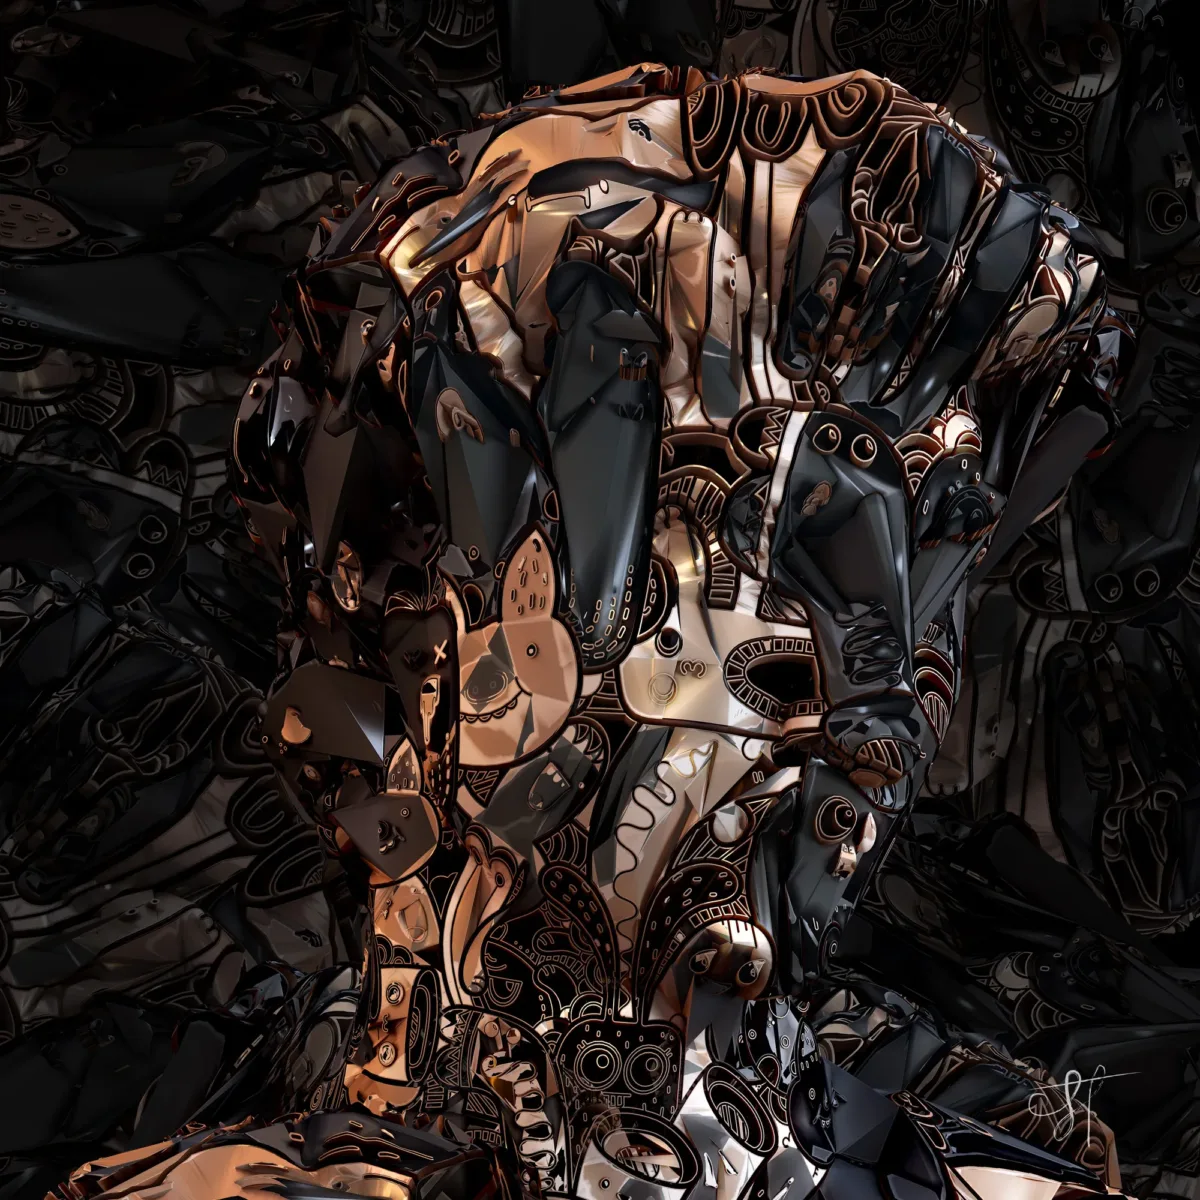 Print from contemporary artist Gabriel Halo - David#28 for sell. This version of the metamorphosis is made from black and gold-plated parts of devices.